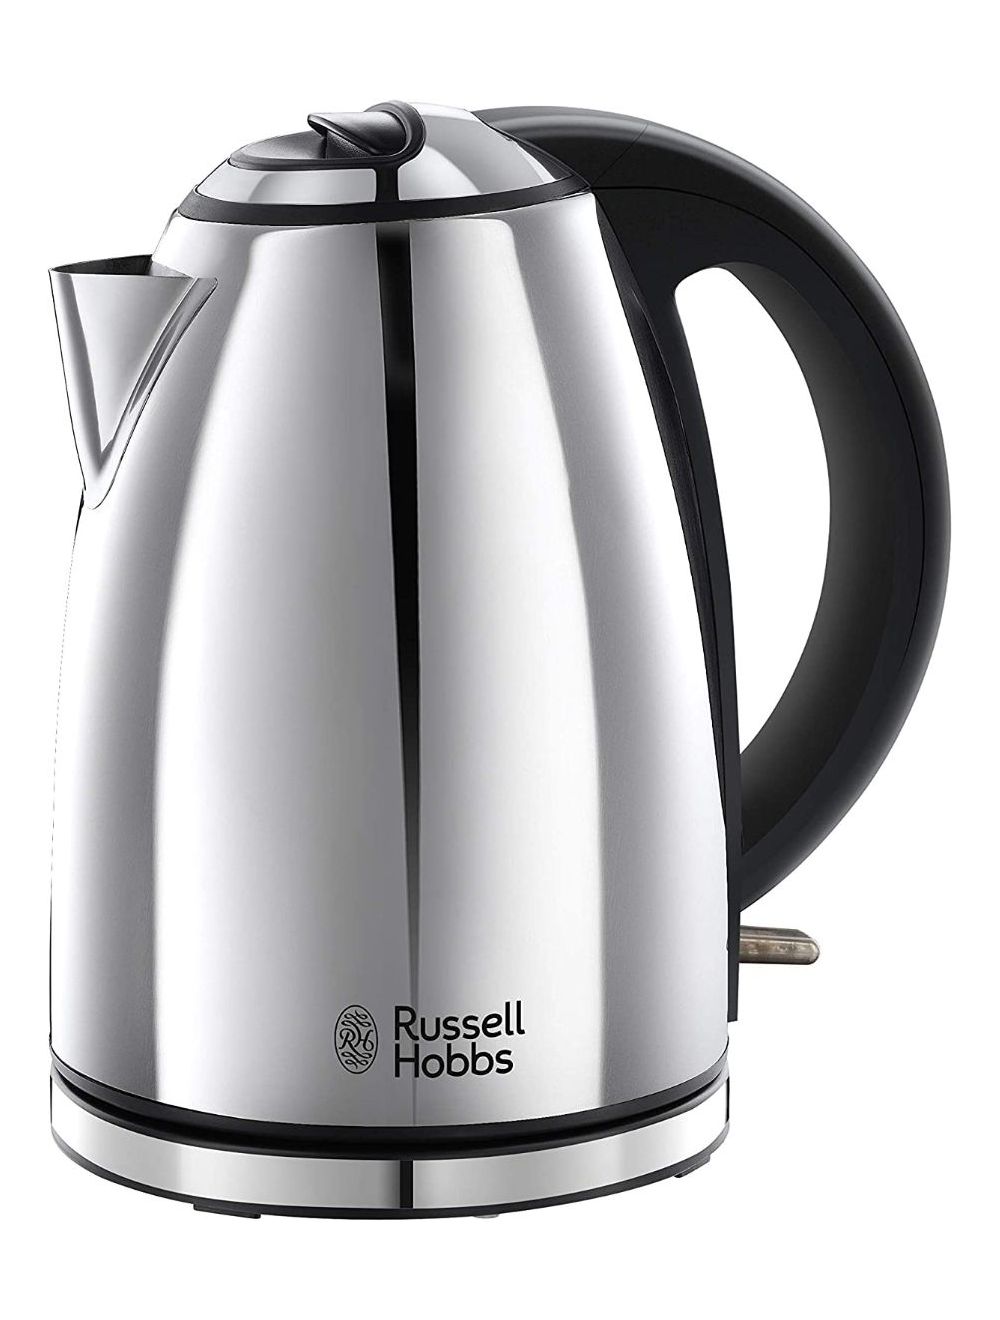 Russell Hobbs Henley Kettle, Silver, 1.7 Litres-23601